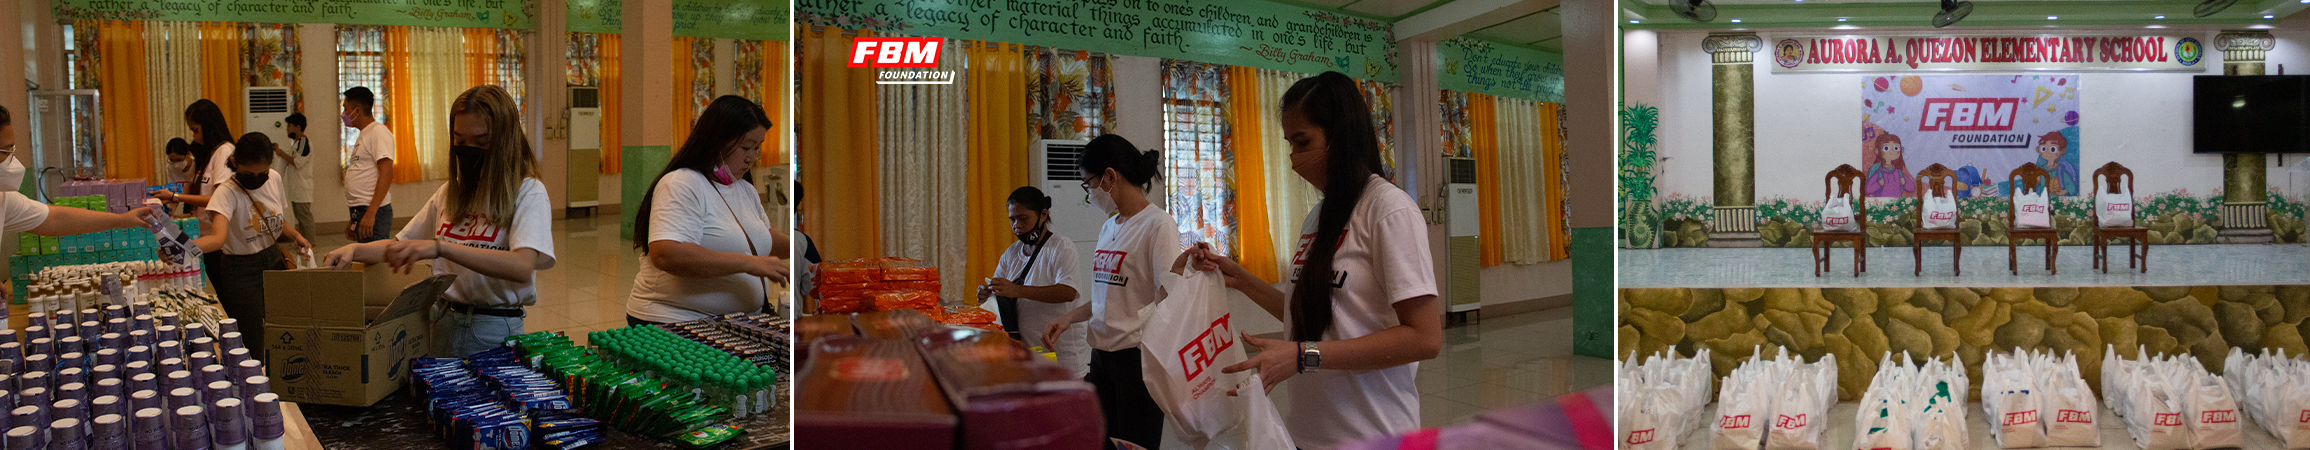 FBM Foundation helps 200 students from Aurora A. Quezon Elementary School